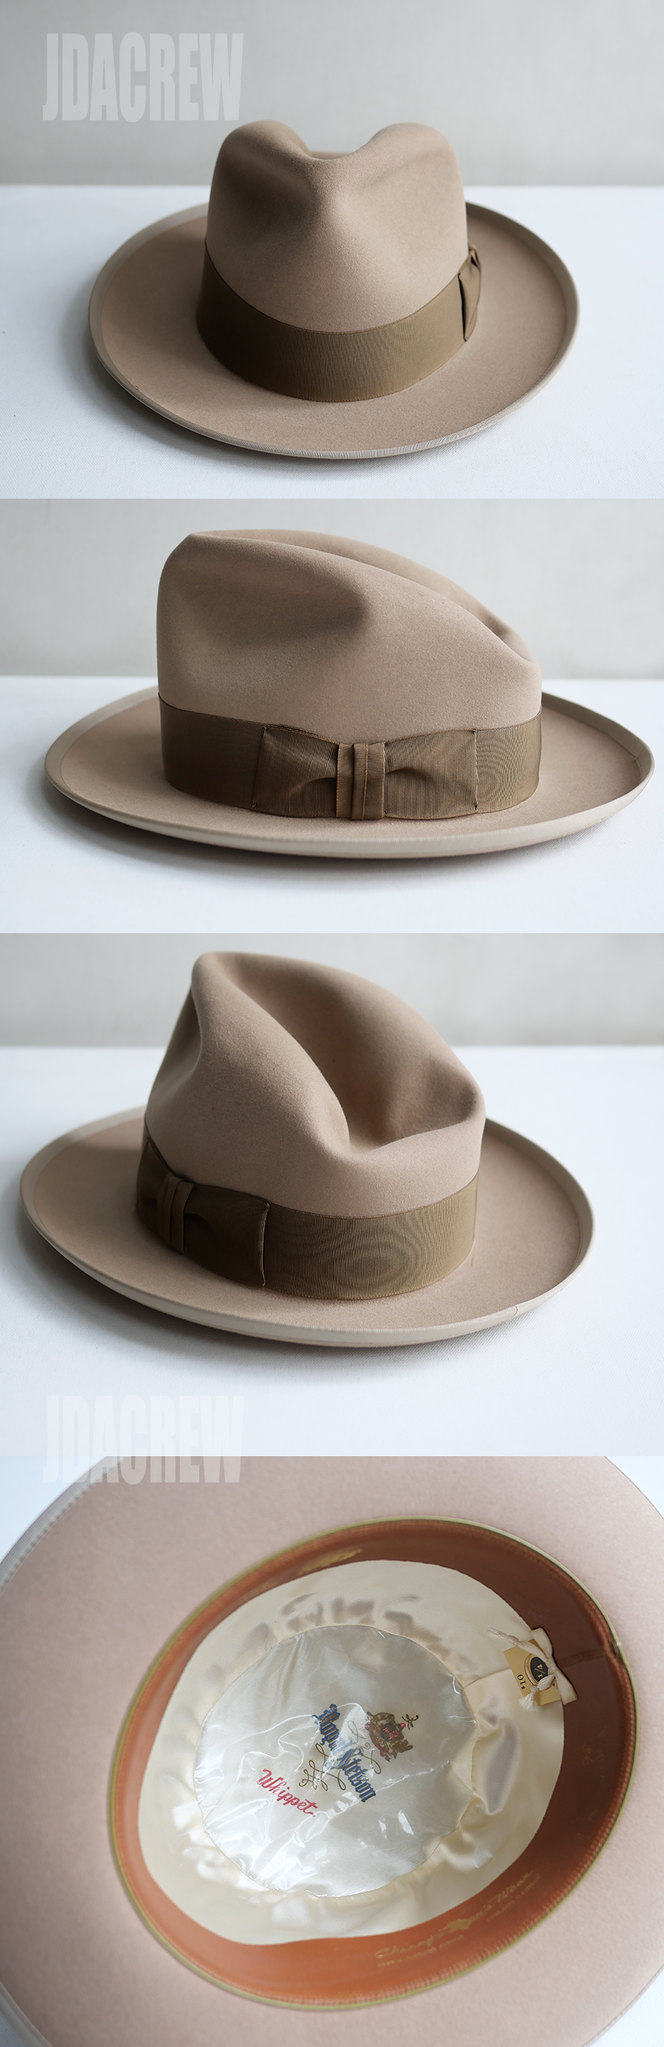 ROYAL STETSON WHIPPET ヴィンテージフェドラハット